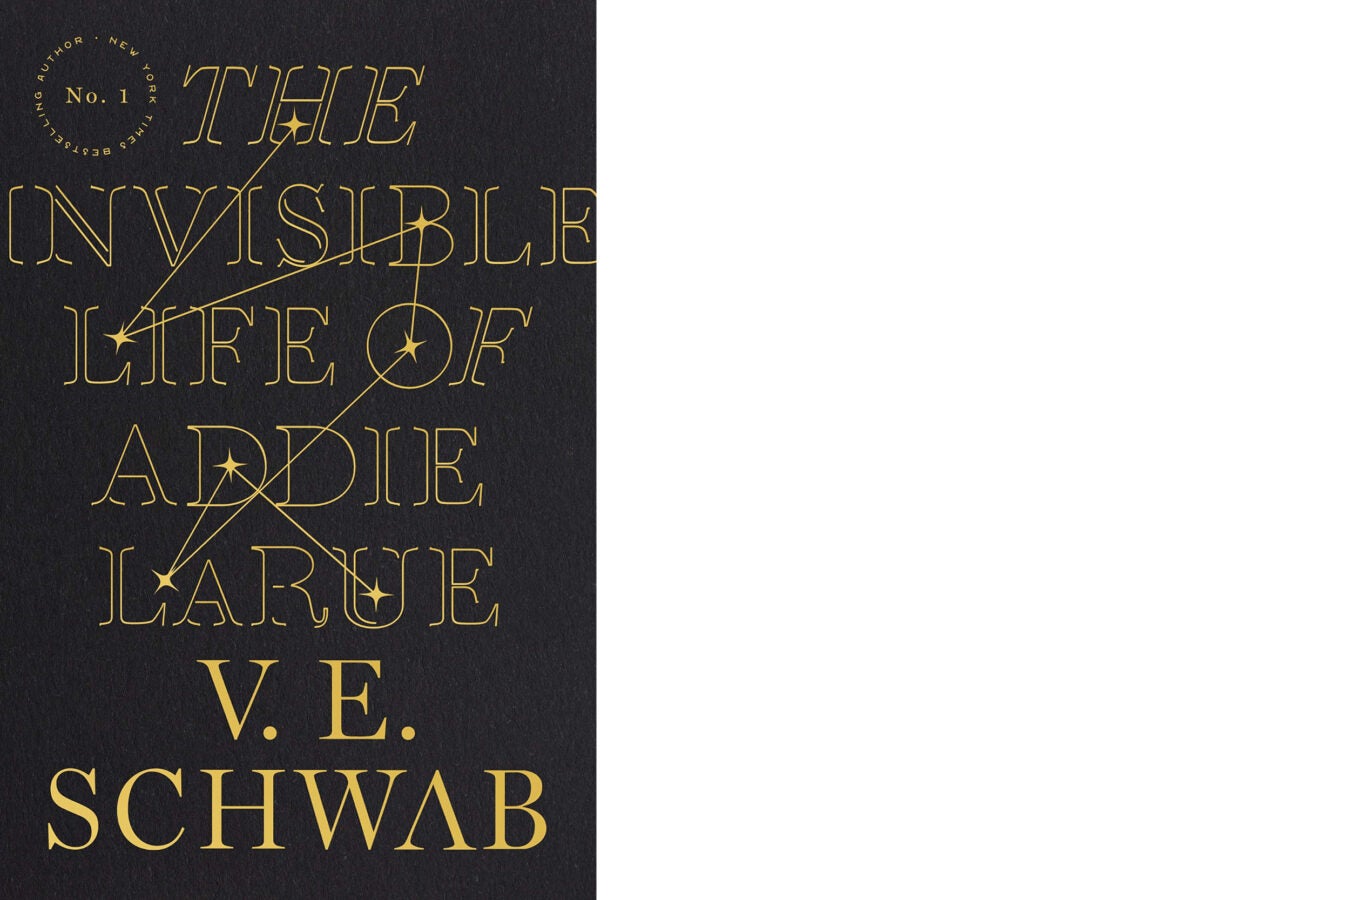 Book cover: “The Invisible Life of Addie LaRue” by V.E. Schwab.